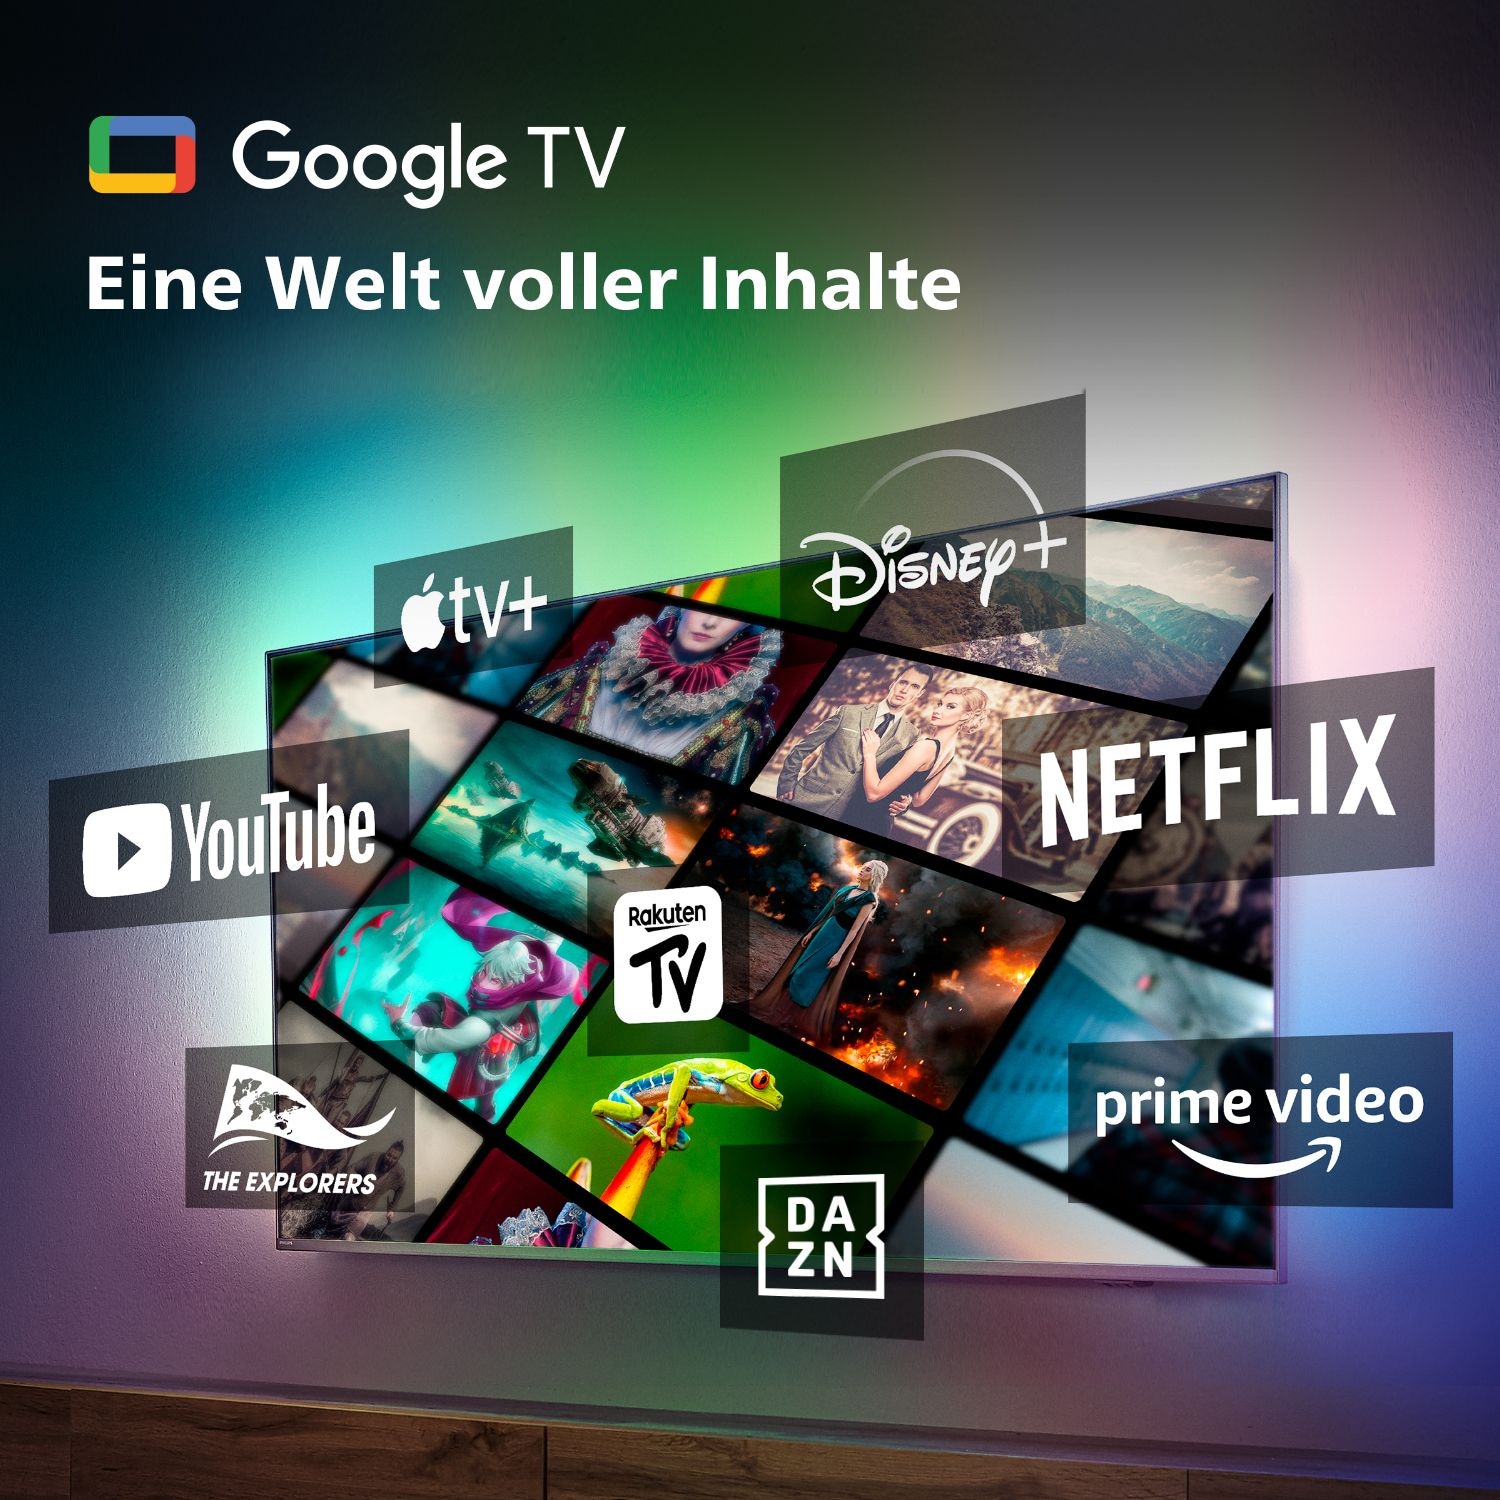 Philips LED-Fernseher TV Zoll, online HD, Smart-TV-Android cm/48 OTTO 4K »48OLED808/12«, 122 bei Ultra